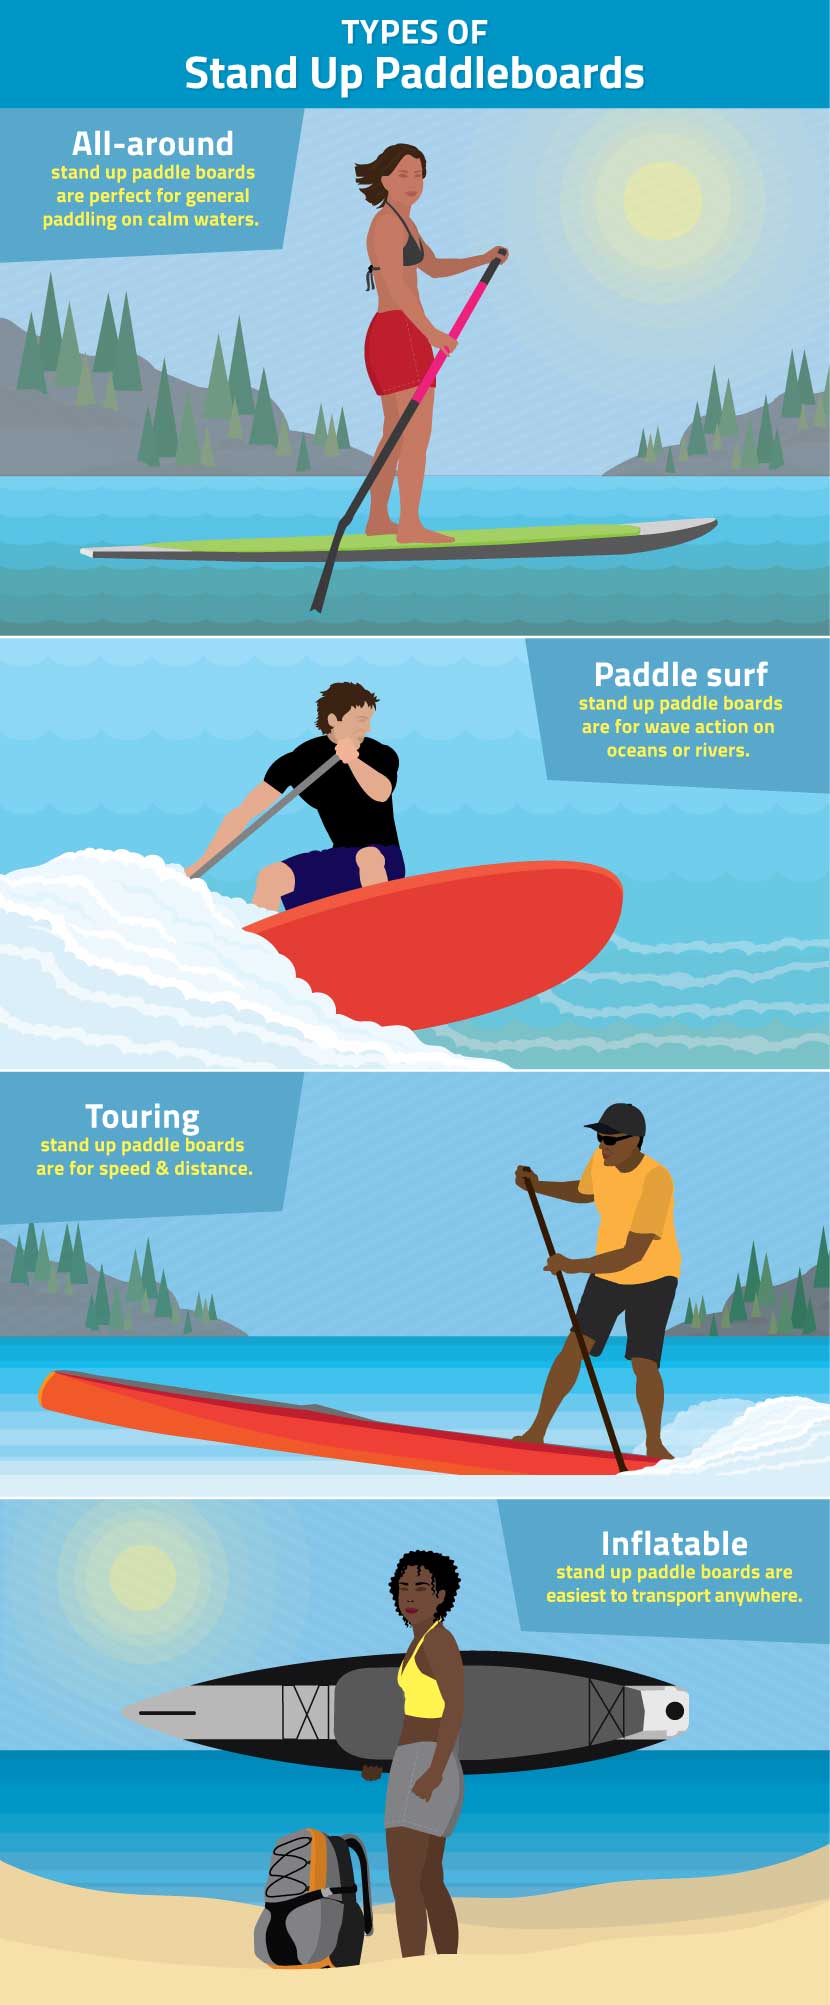 types-of-standup-paddleboards